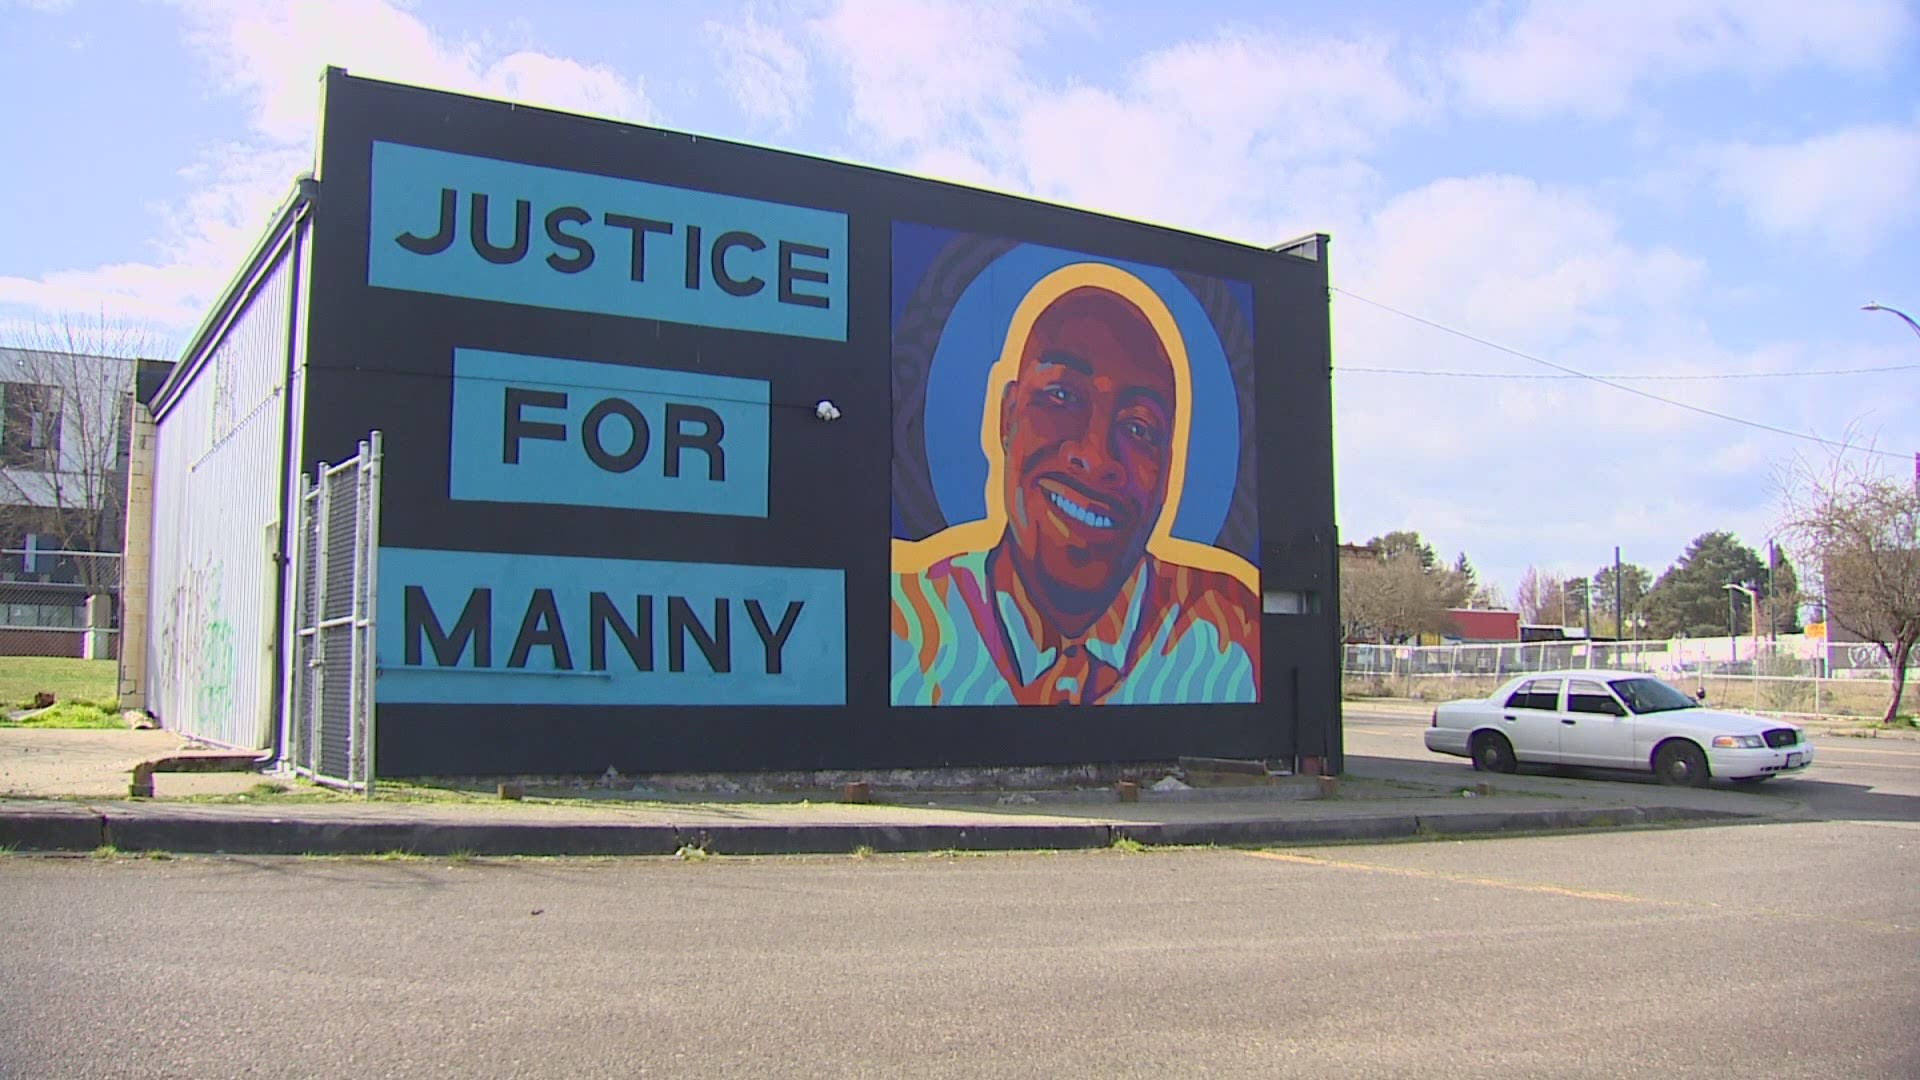 Manuel Ellis was killed in police custody after also saying he couldn't breathe. Activists in Tacoma say the George Floyd case is eerily similar.